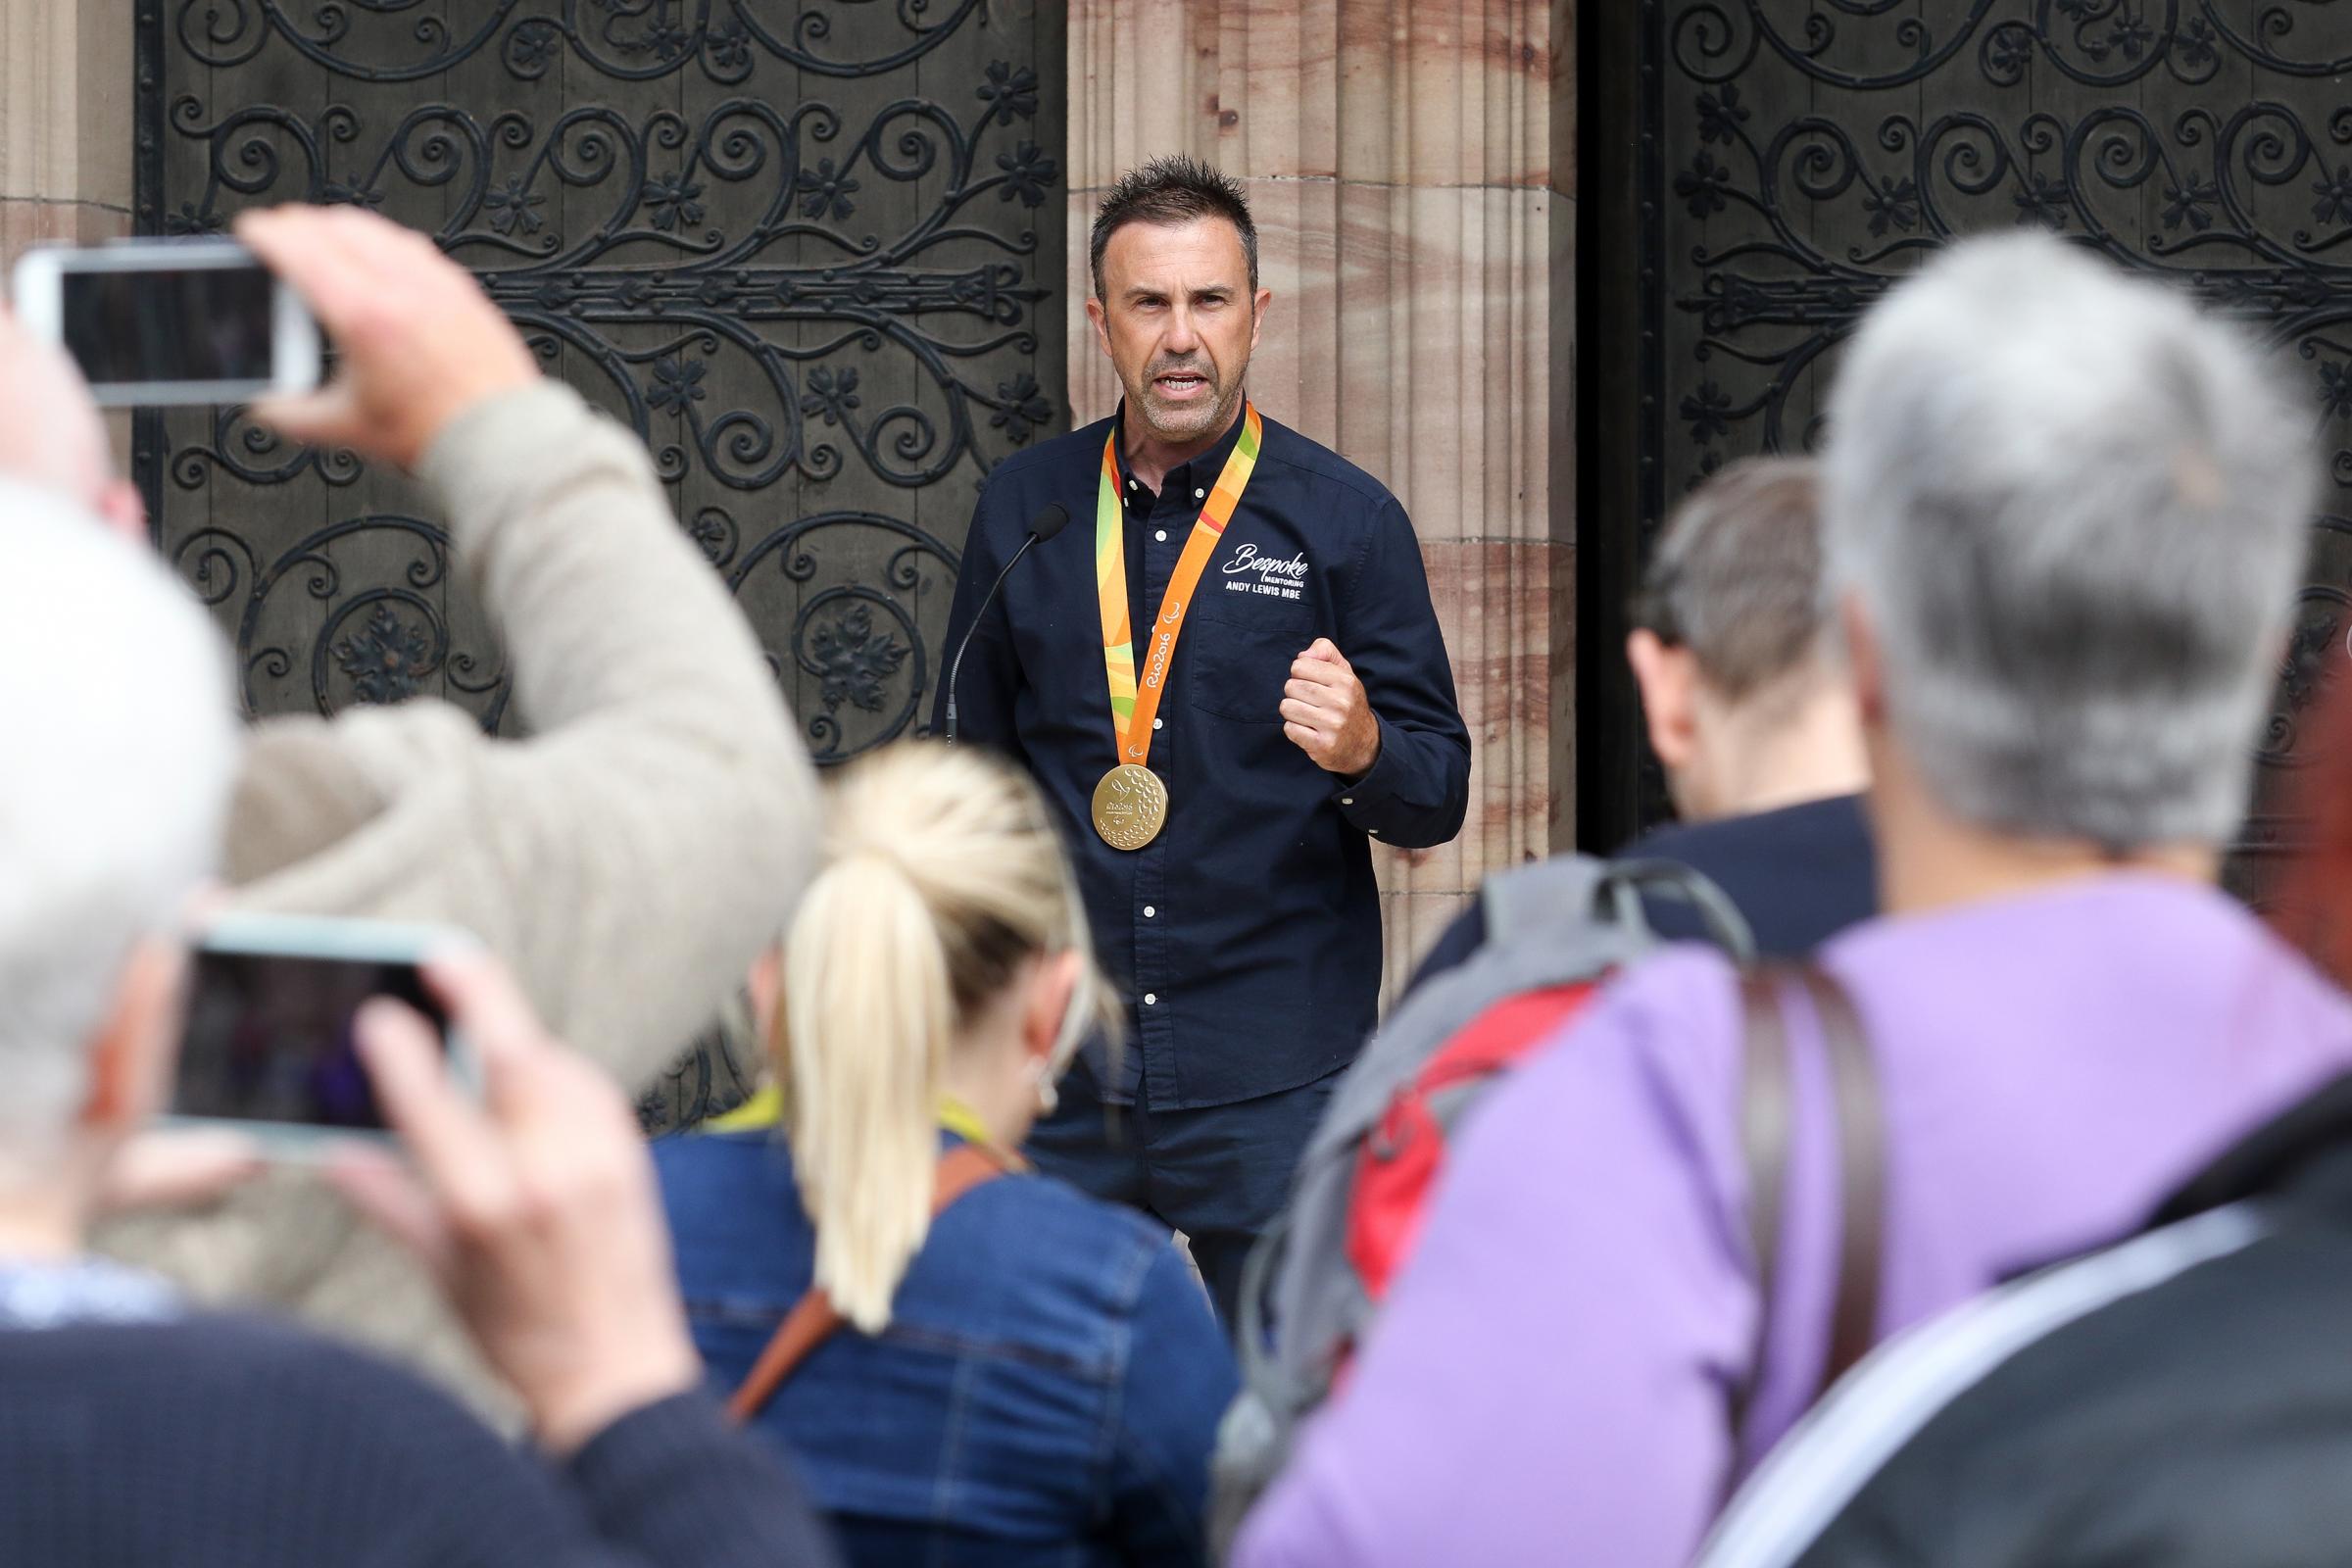 Paralympic champion, Andy Lewis MBE speaks to the crowd outside Herefords Cathedral.